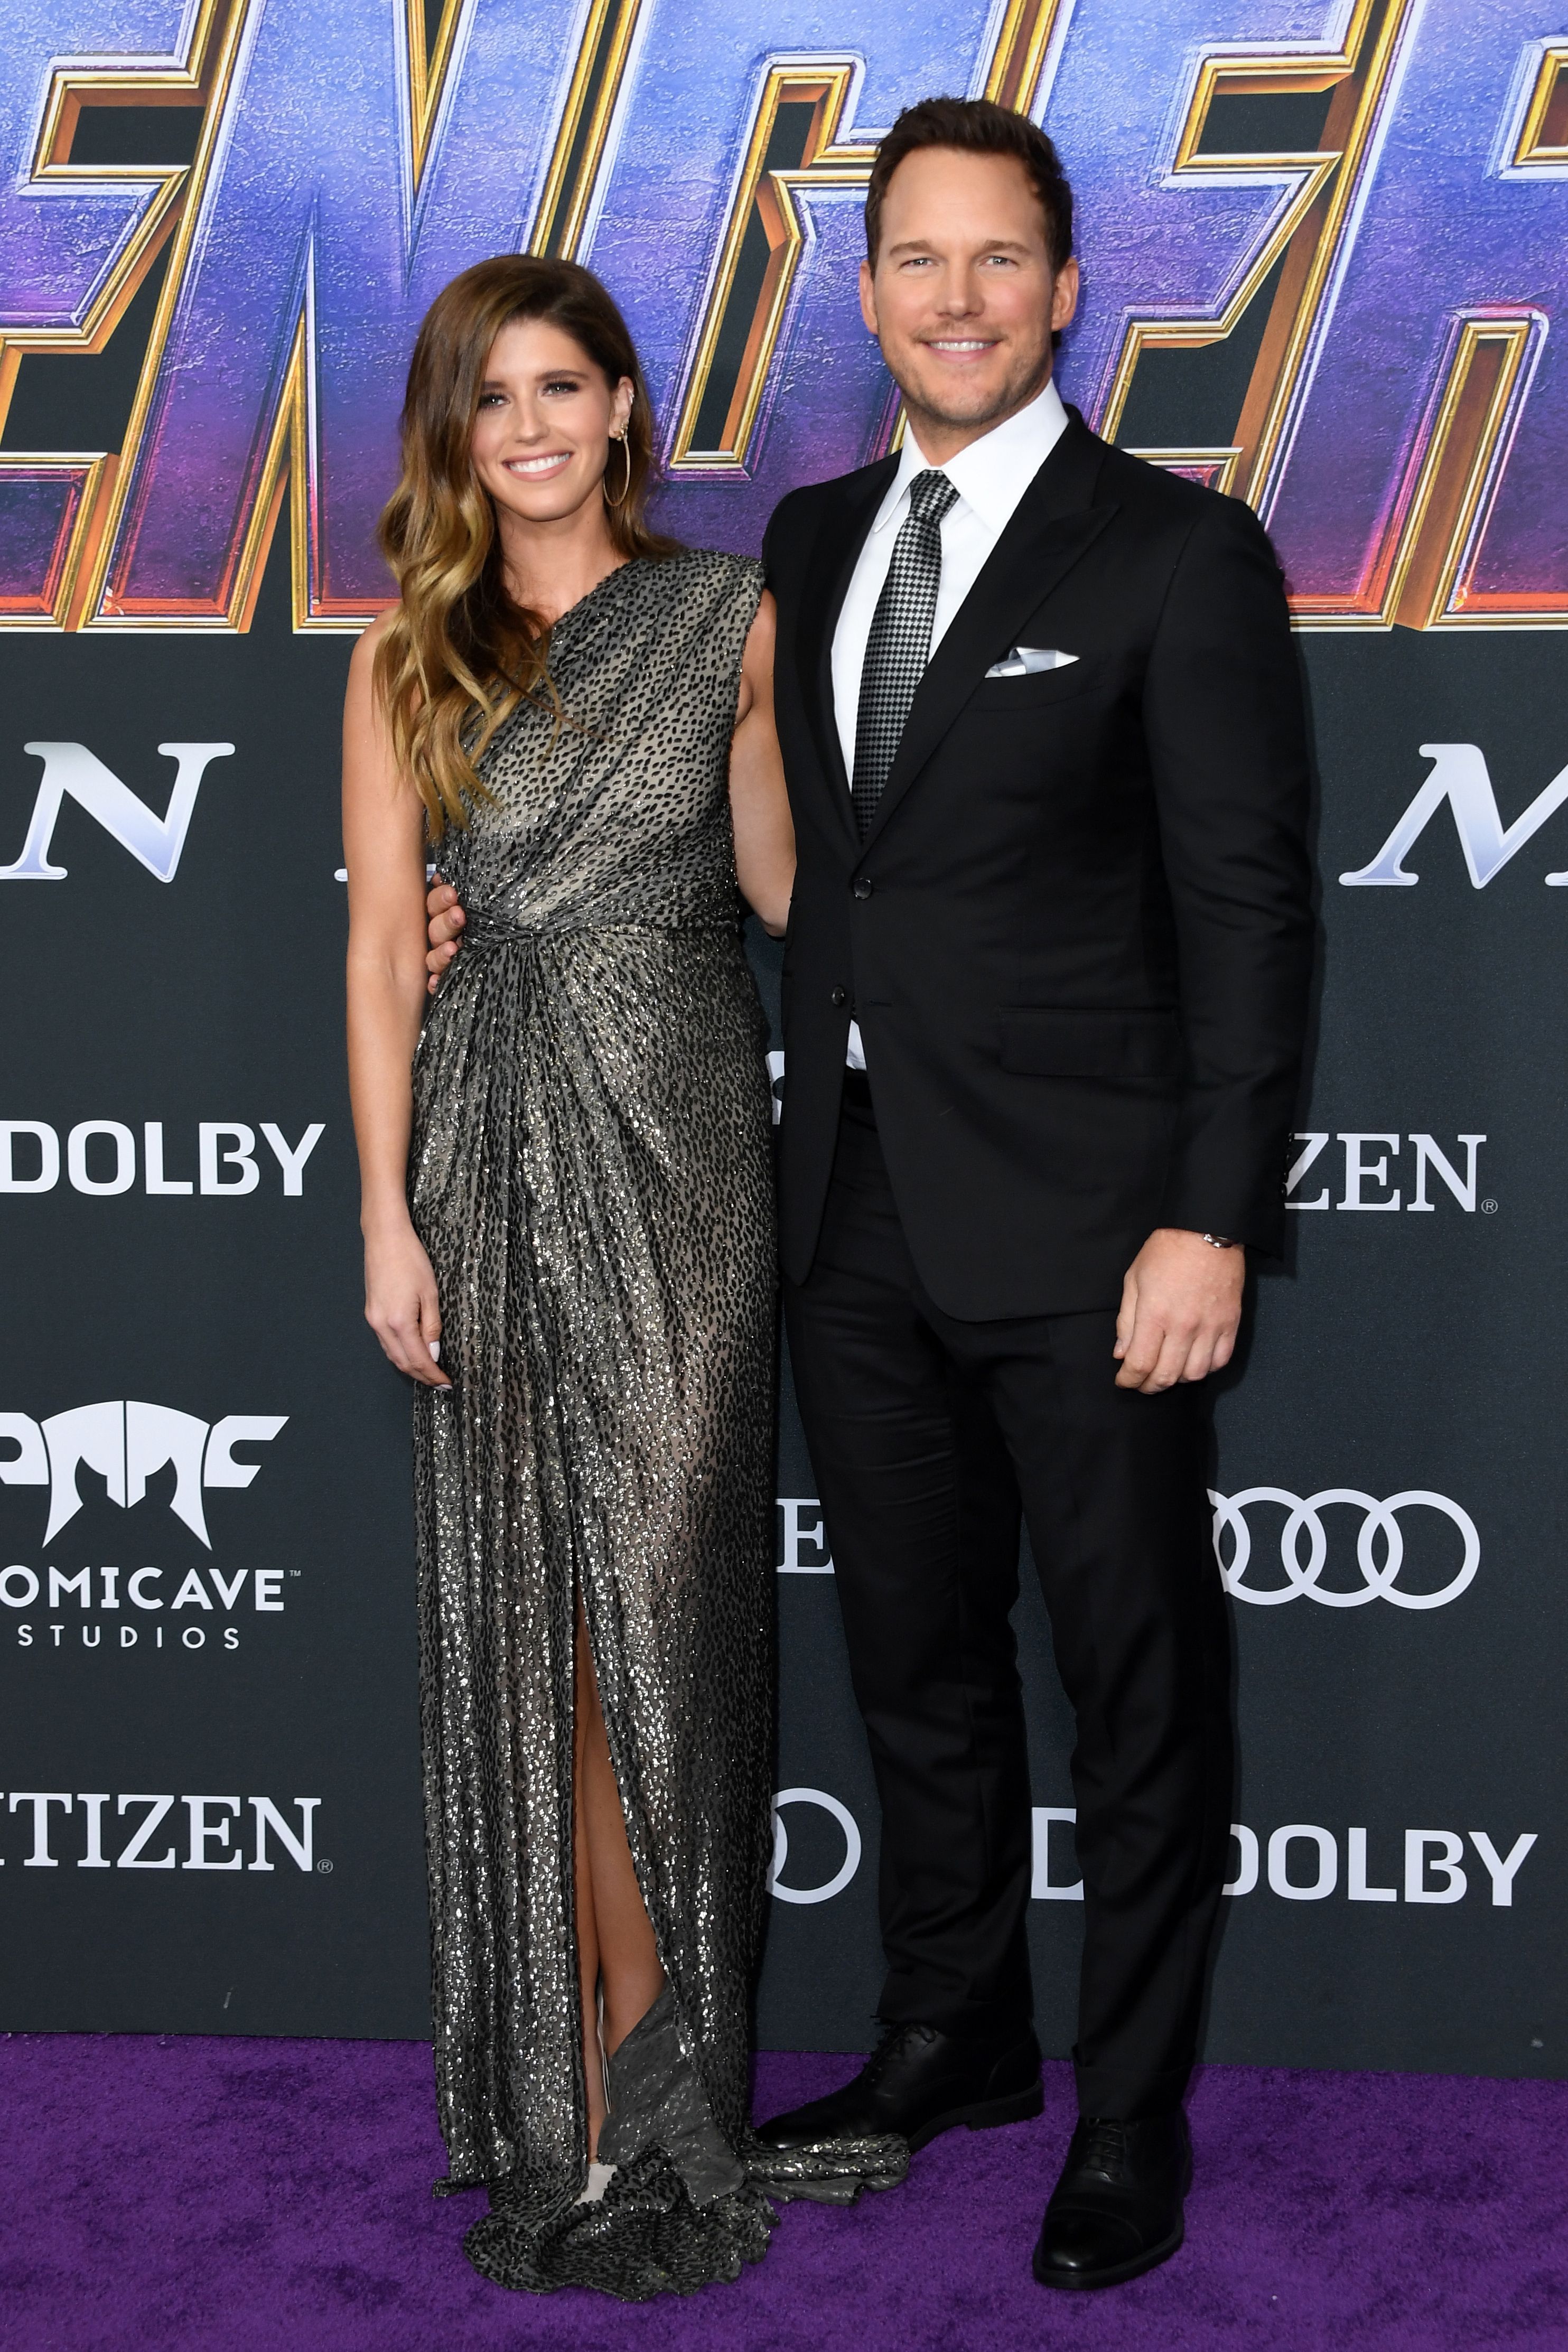 The Cast of Avengers: Endgame Looked Stylish as Hell on the Red Carpet